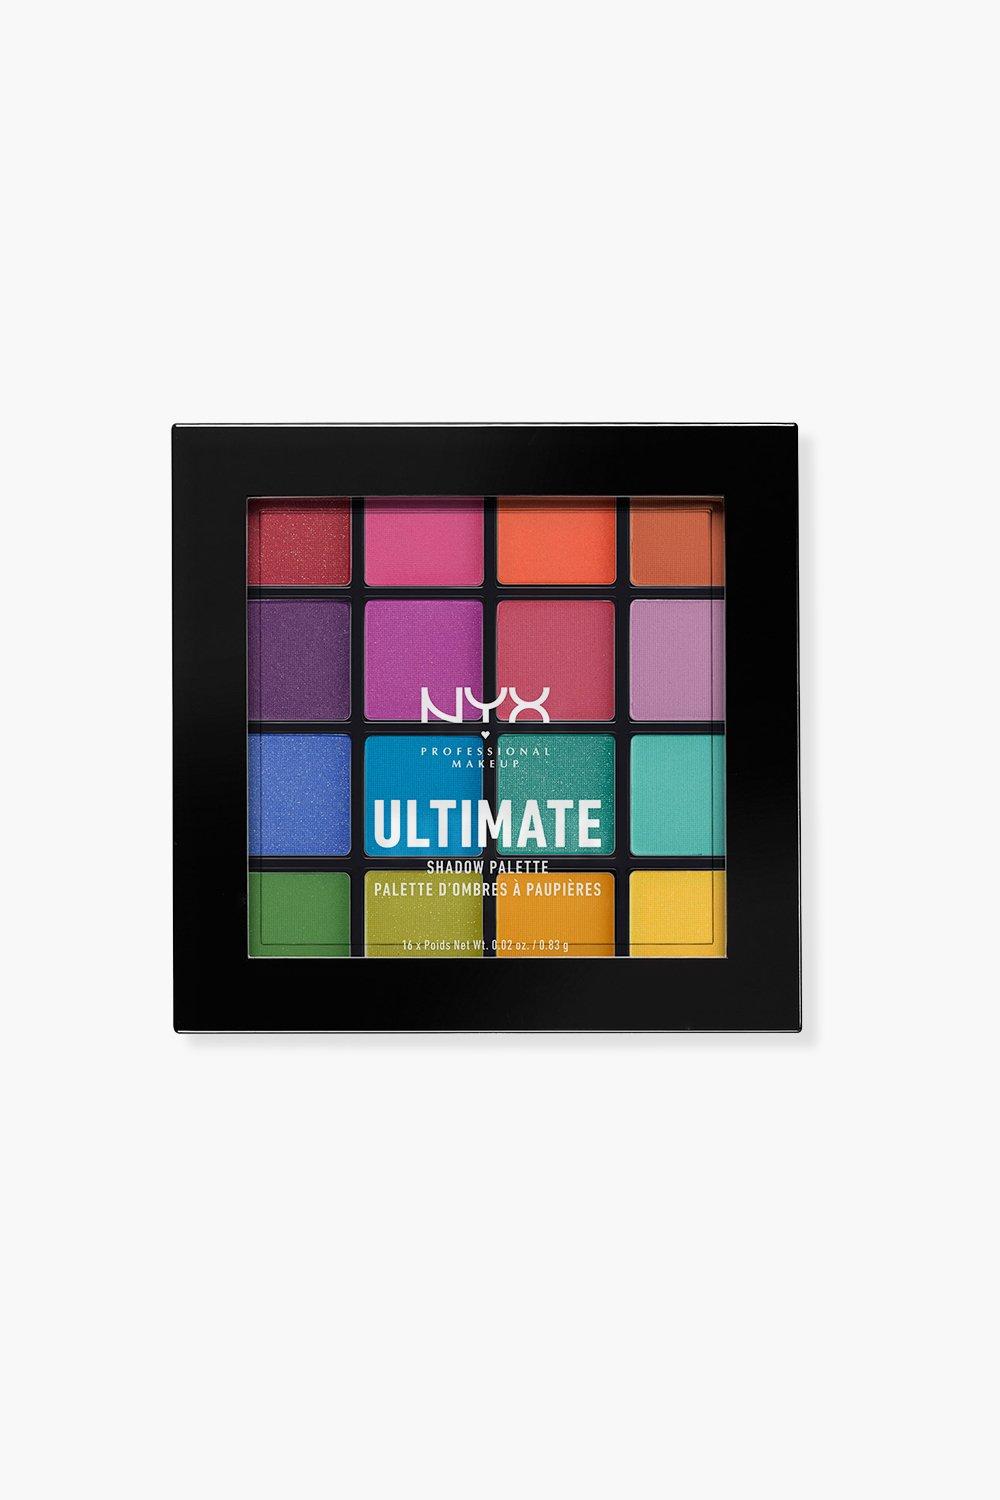 Nyx Professional Makeup Ultimate Shadow Palette- 16 Pressed Pigments Eyeshadow Palette - Brights, Multi